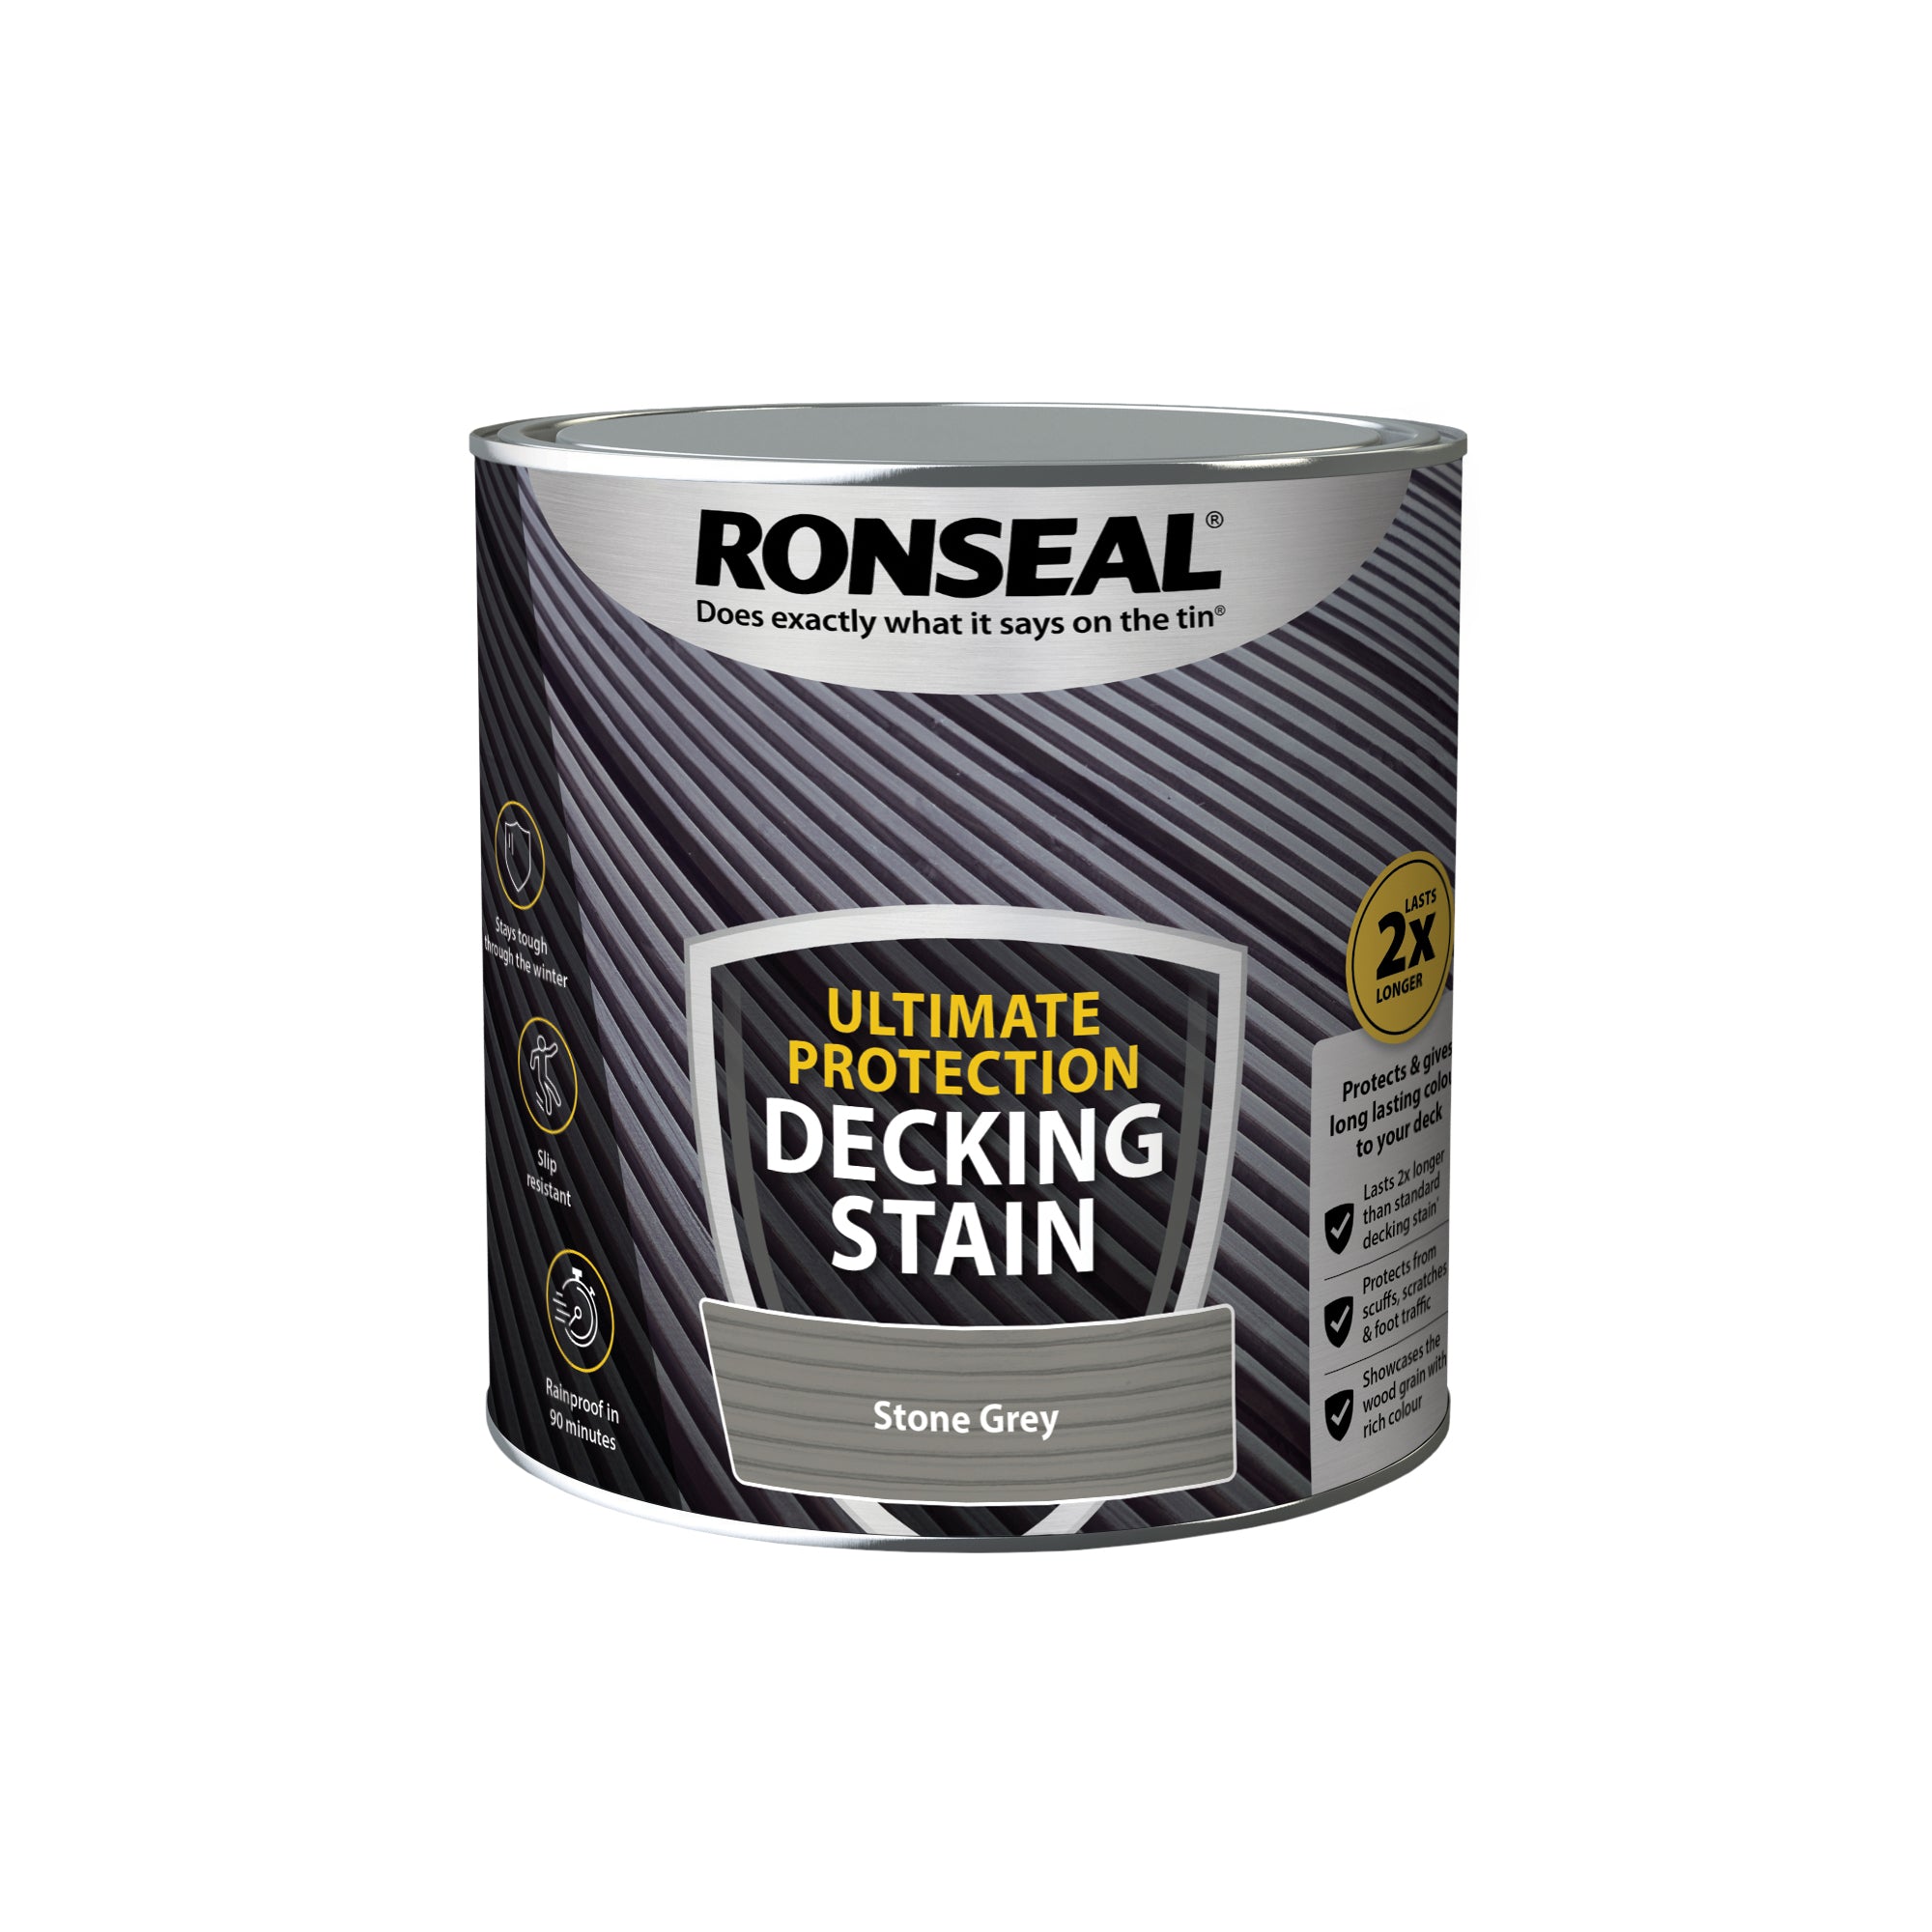 Ronseal-Ultimate-Protection-Decking-Stain-Stone-Grey-2.5L